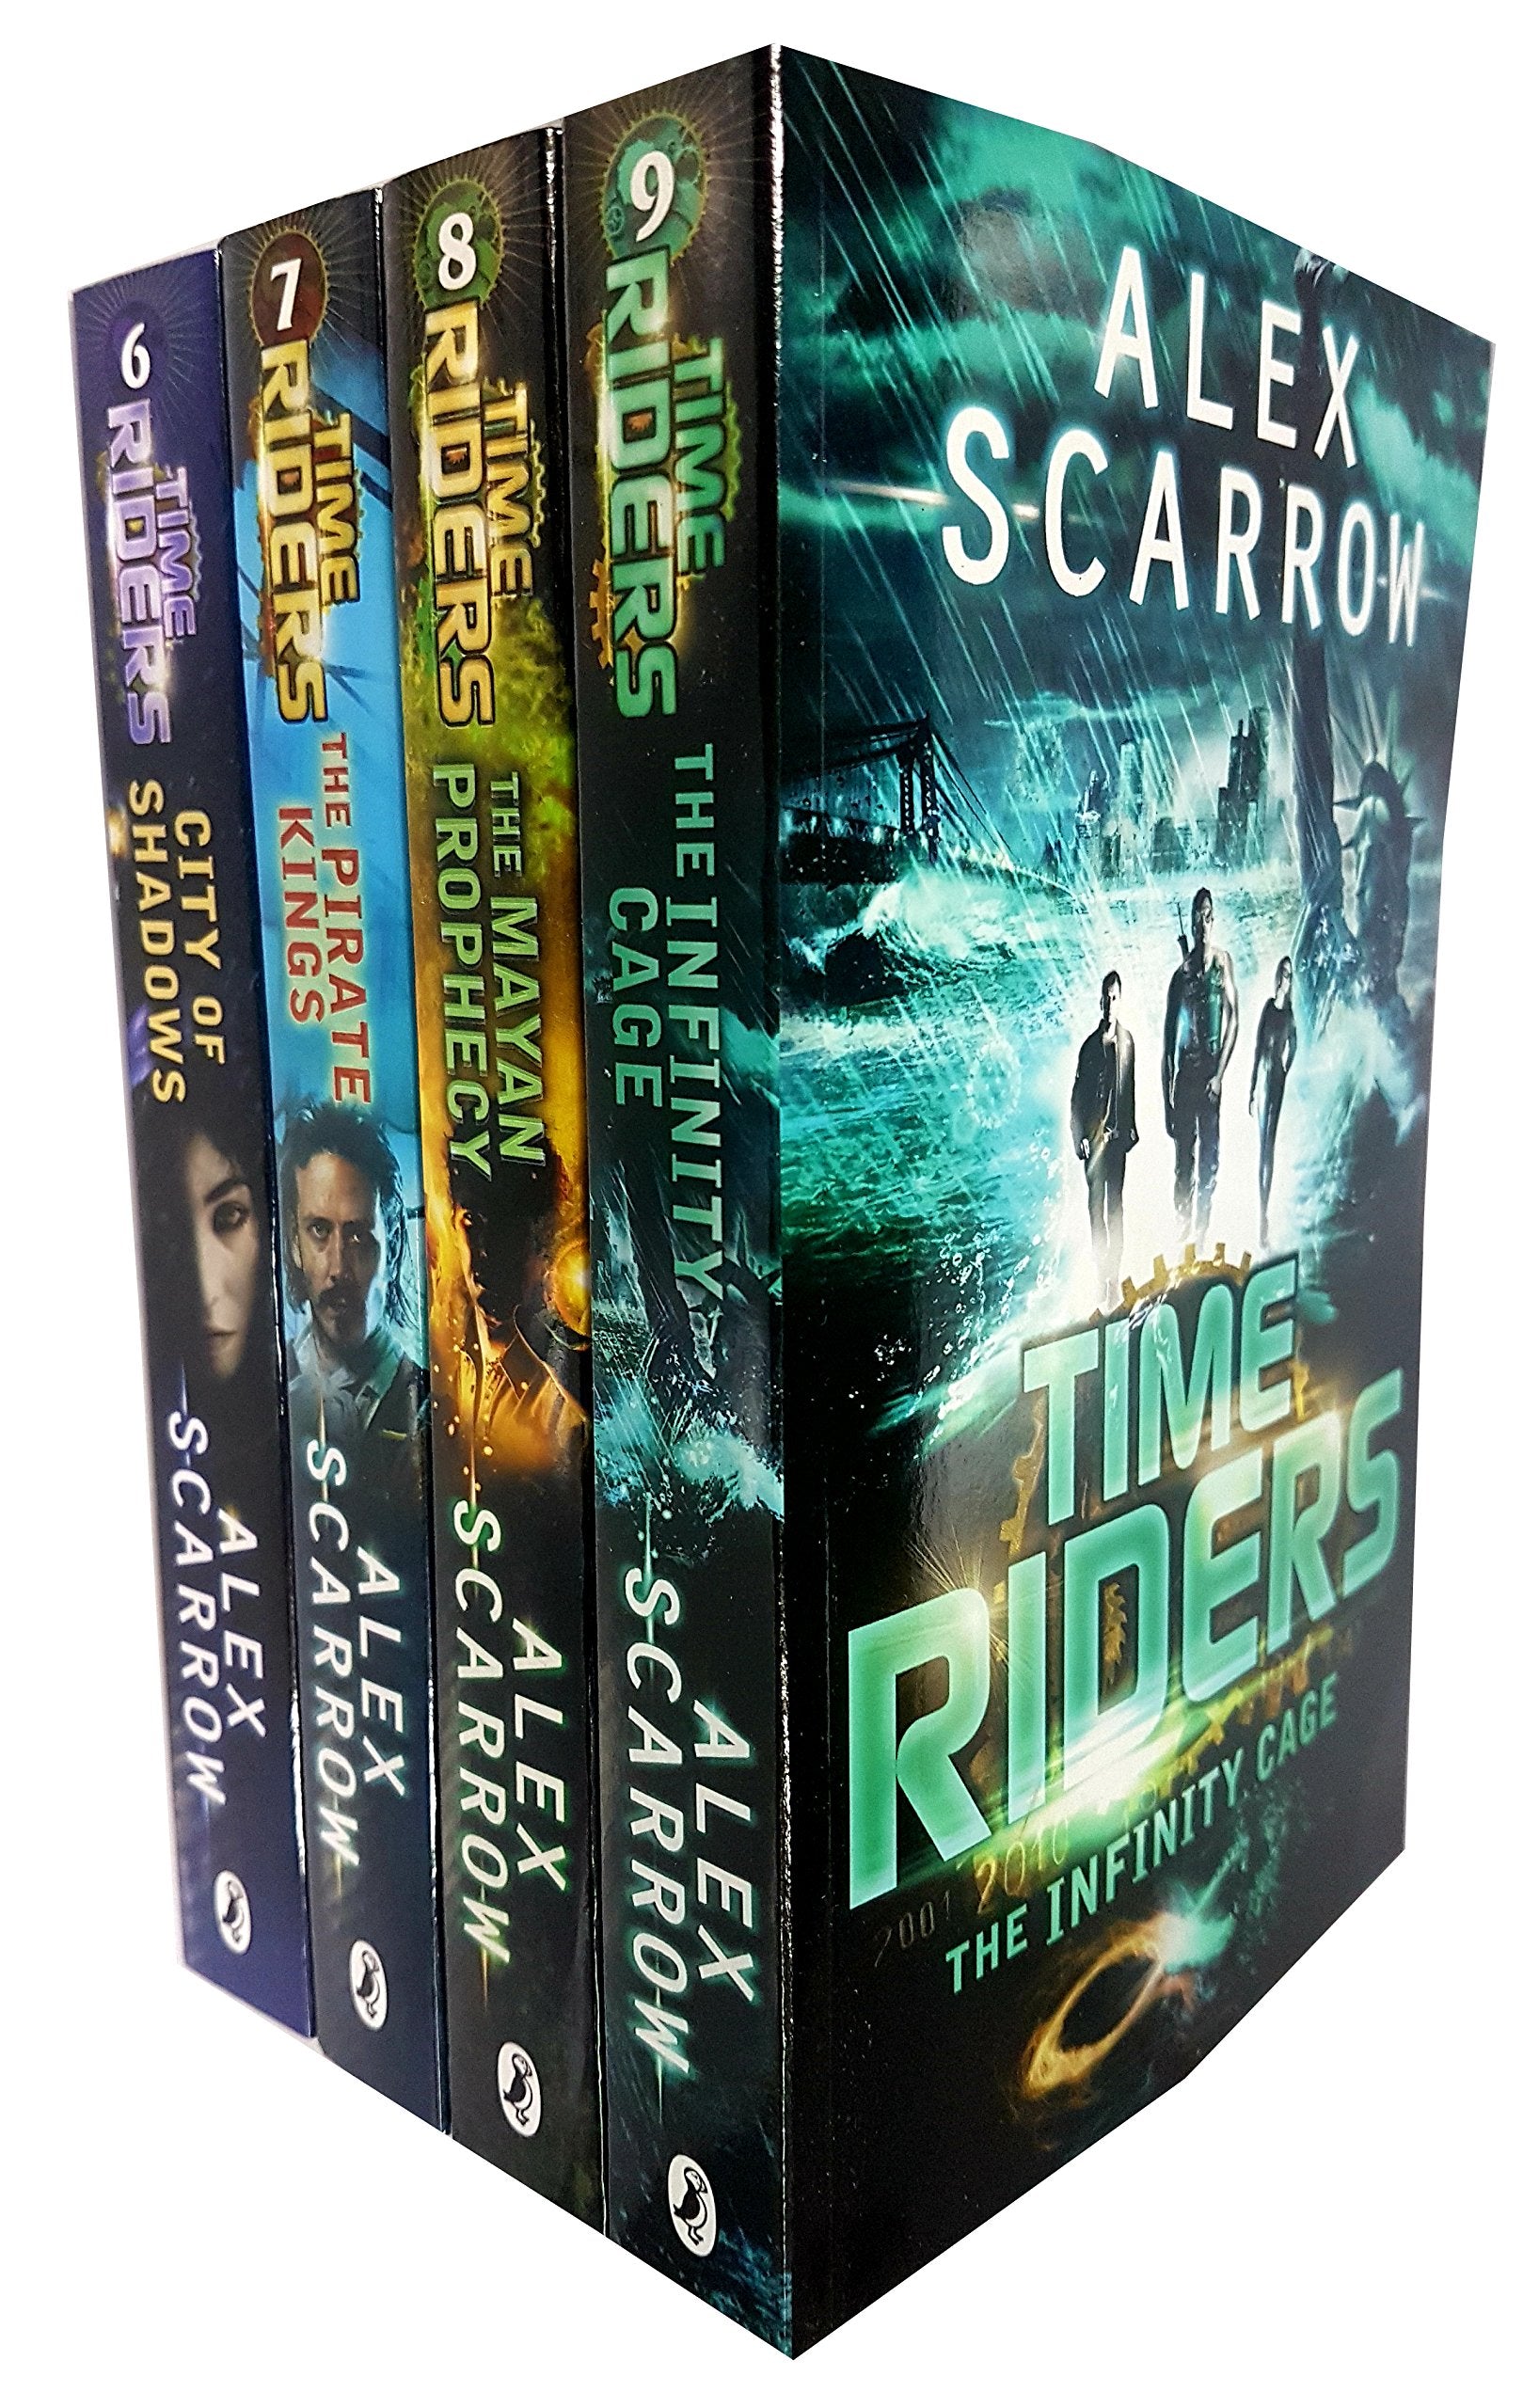 Alex scarrow Time Riders Collection 4 Books Set (Book 6 - 9) (City of Shadows) Paperback - Lets Buy Books